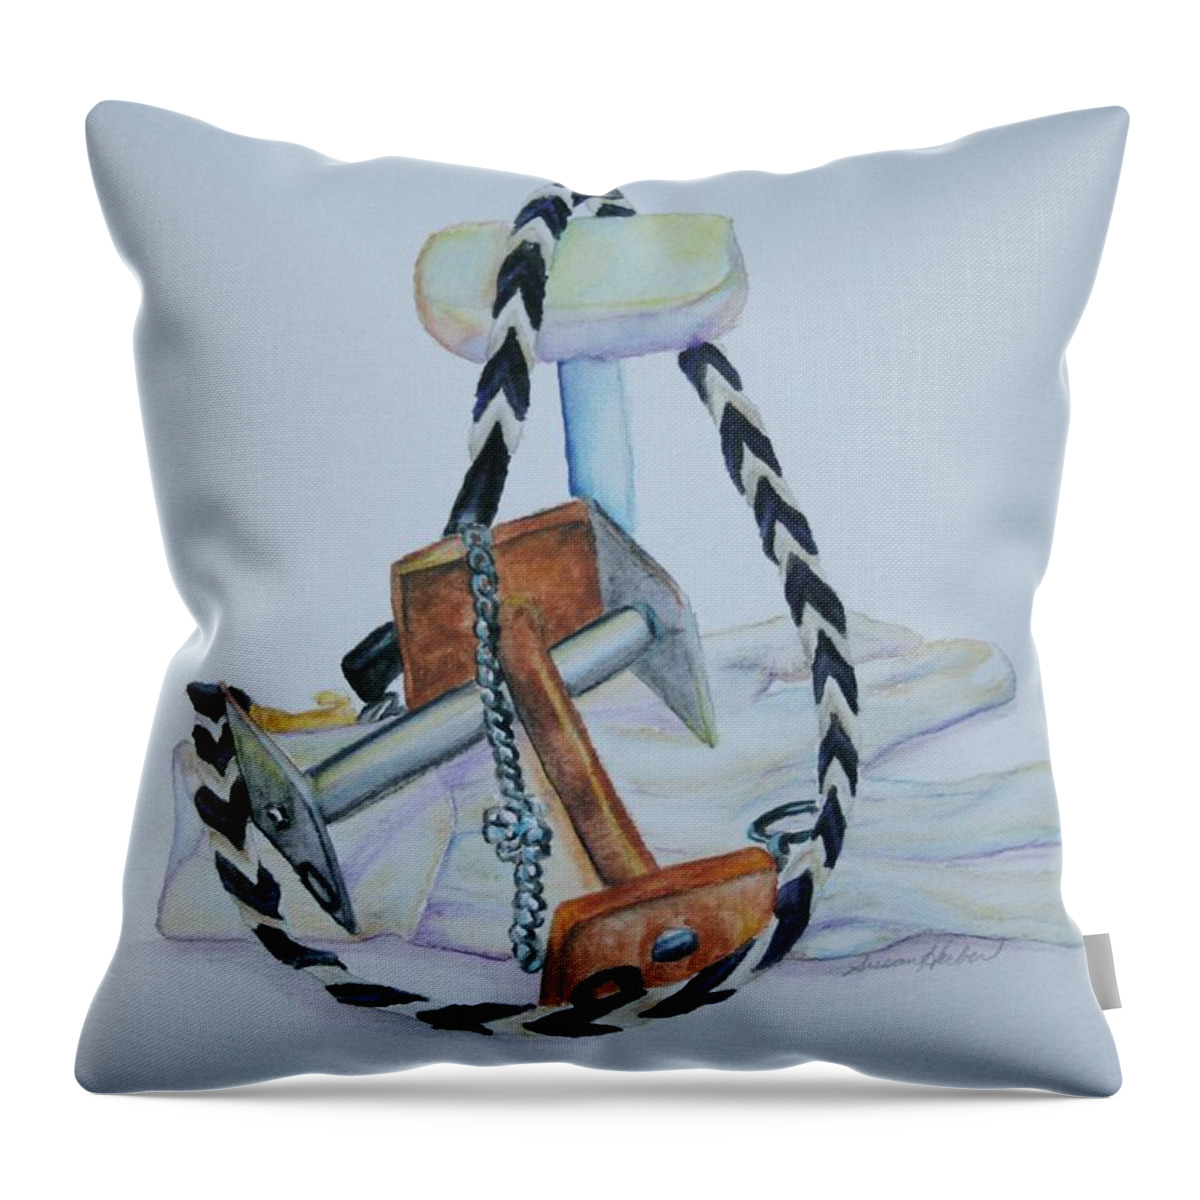 Dumbbells Throw Pillow featuring the painting Article Pile by Susan Herber